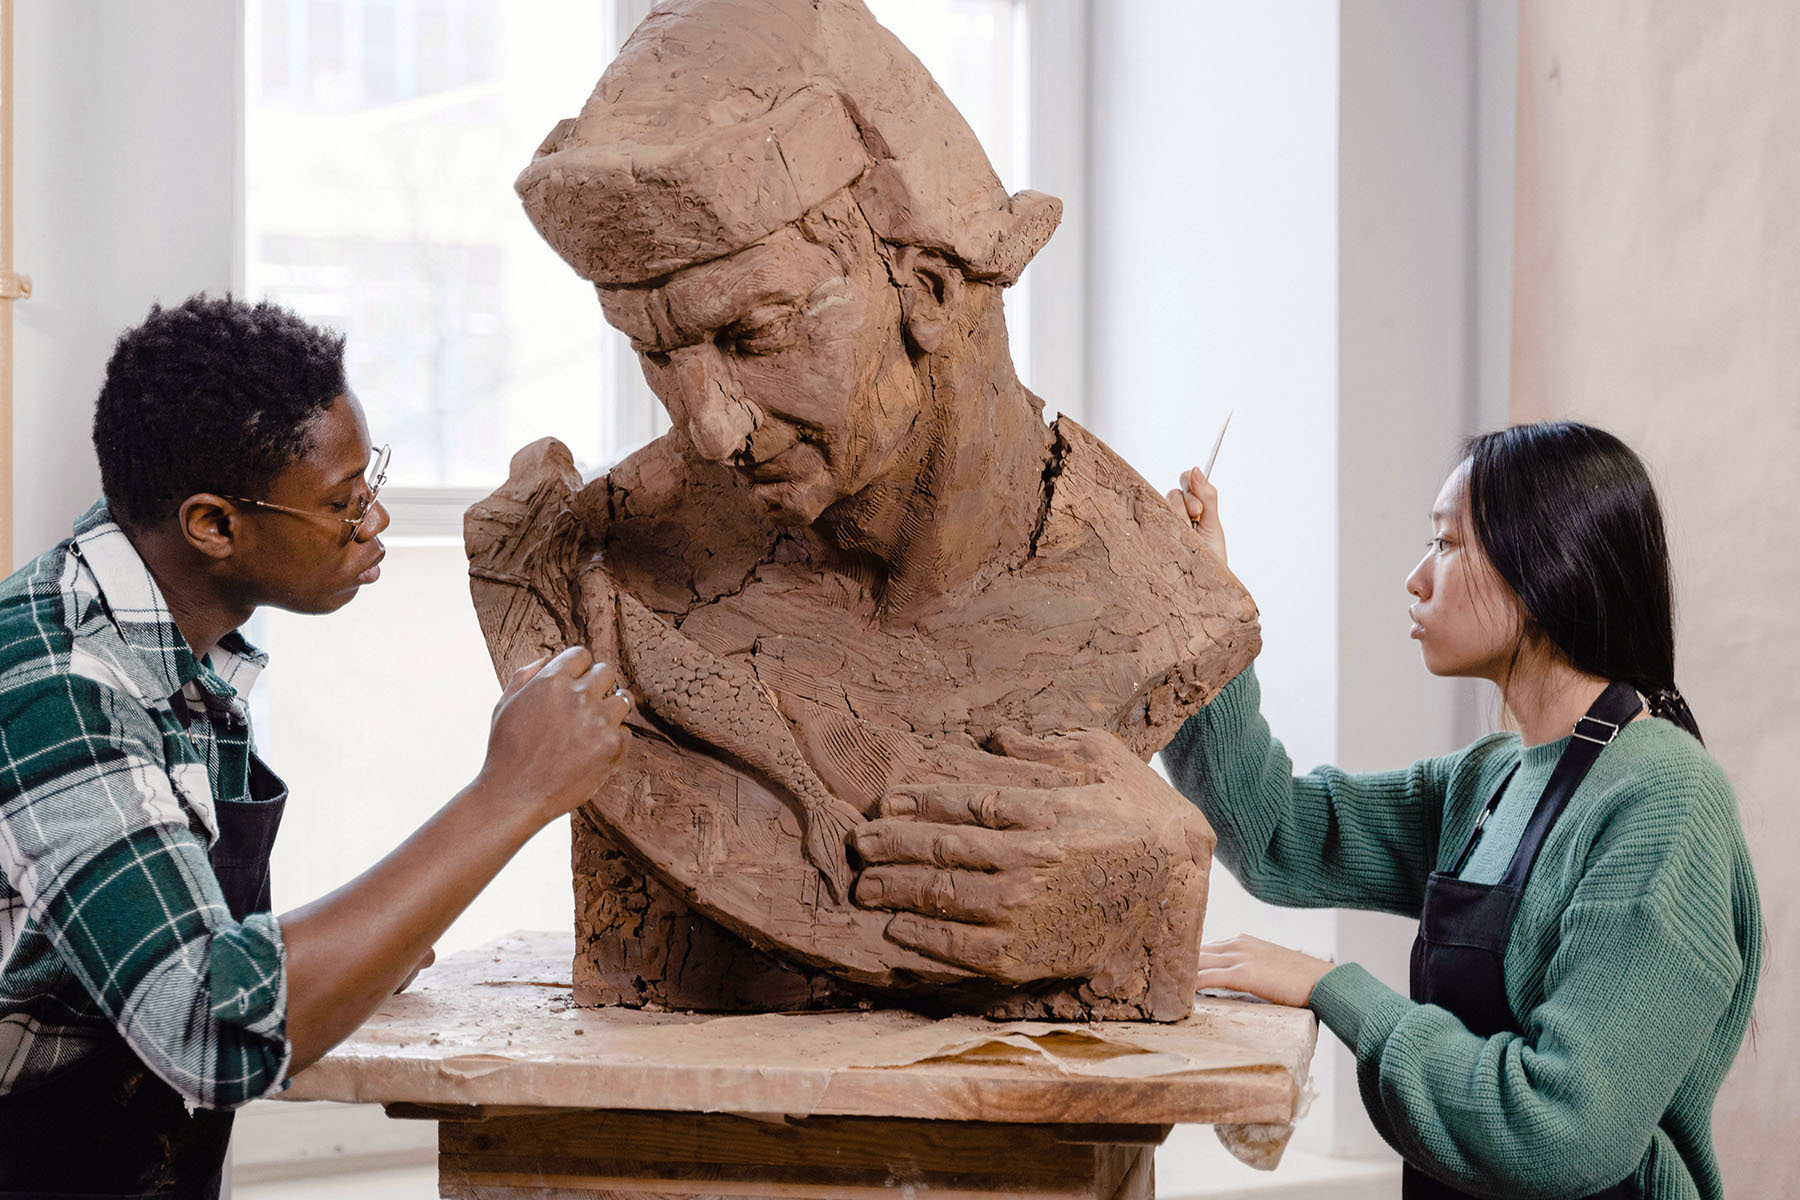 Two sculptors crafting a clay sculpture. They're very concentrated at work.